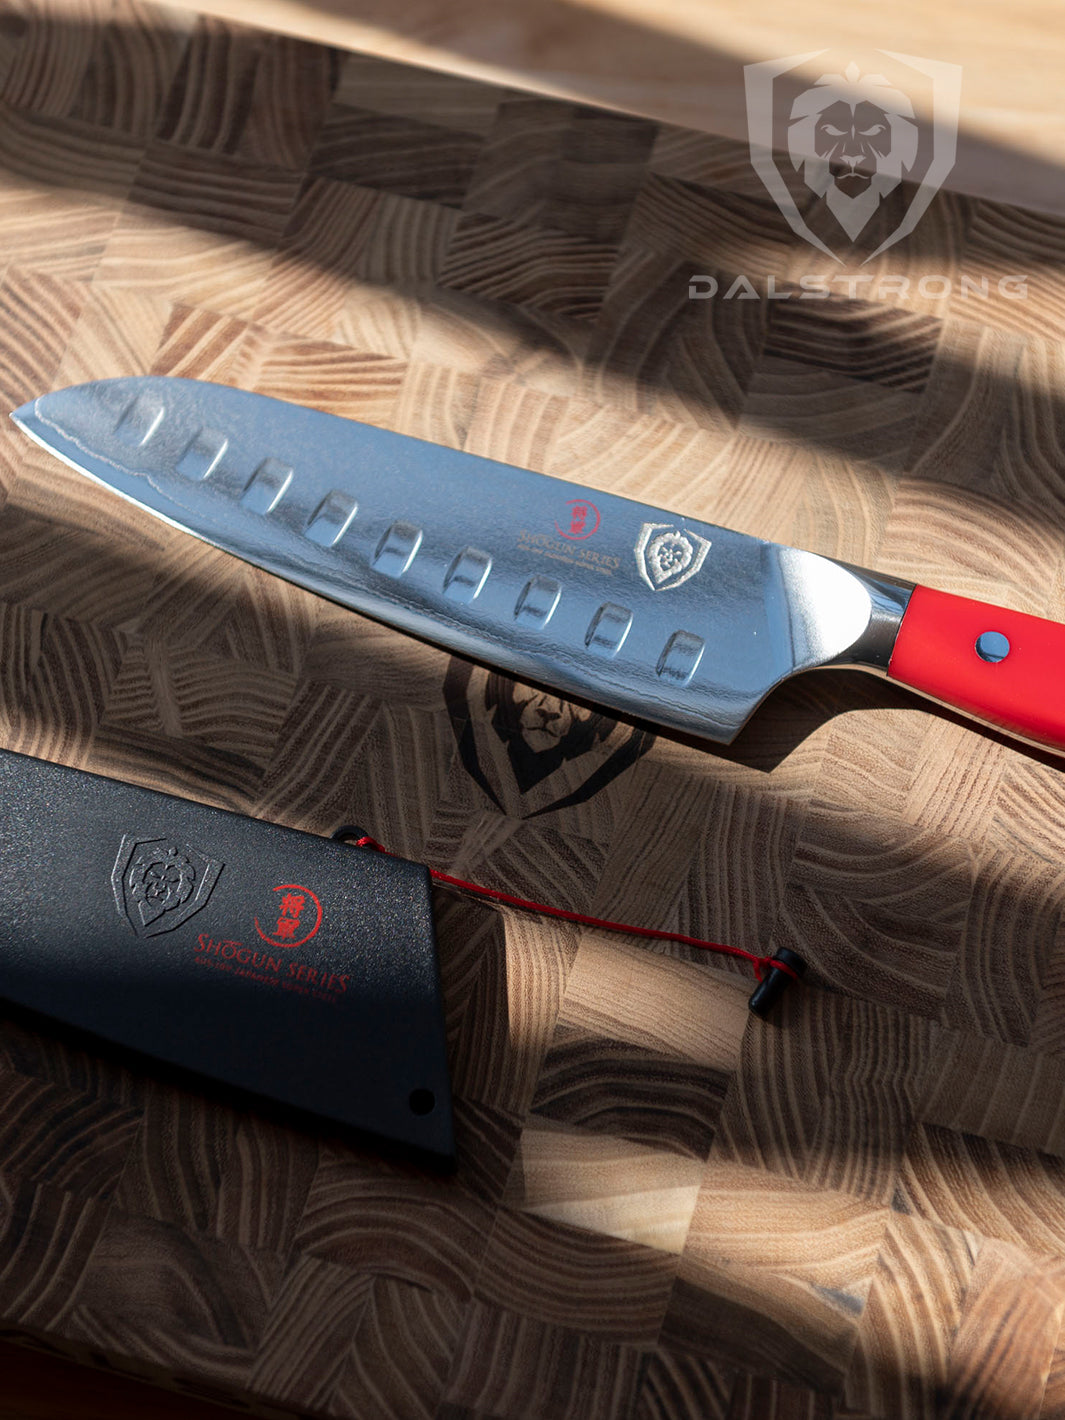 Dalstrong shogun series 7 inch santoku knife with crimson red handle and black sheath on a dalstrong wooden board.